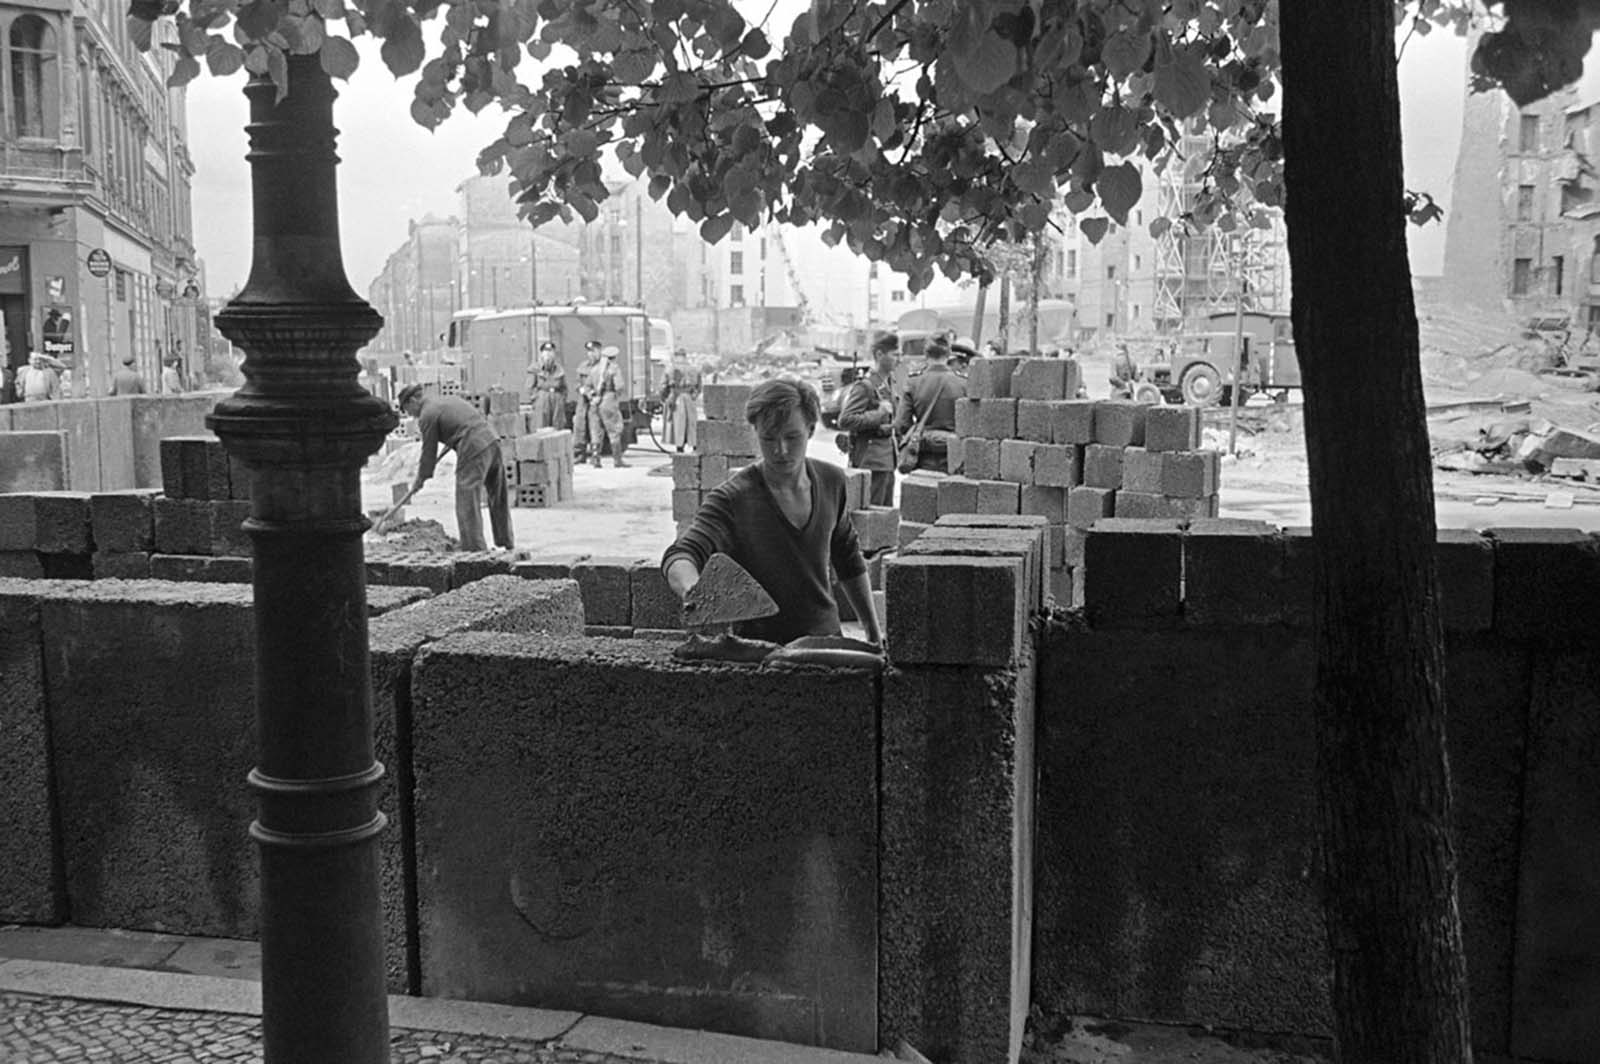 A young East Berliner works on a concrete wall that was later topped by barbed wire at a sector border in the divided city on August 18, 1961.